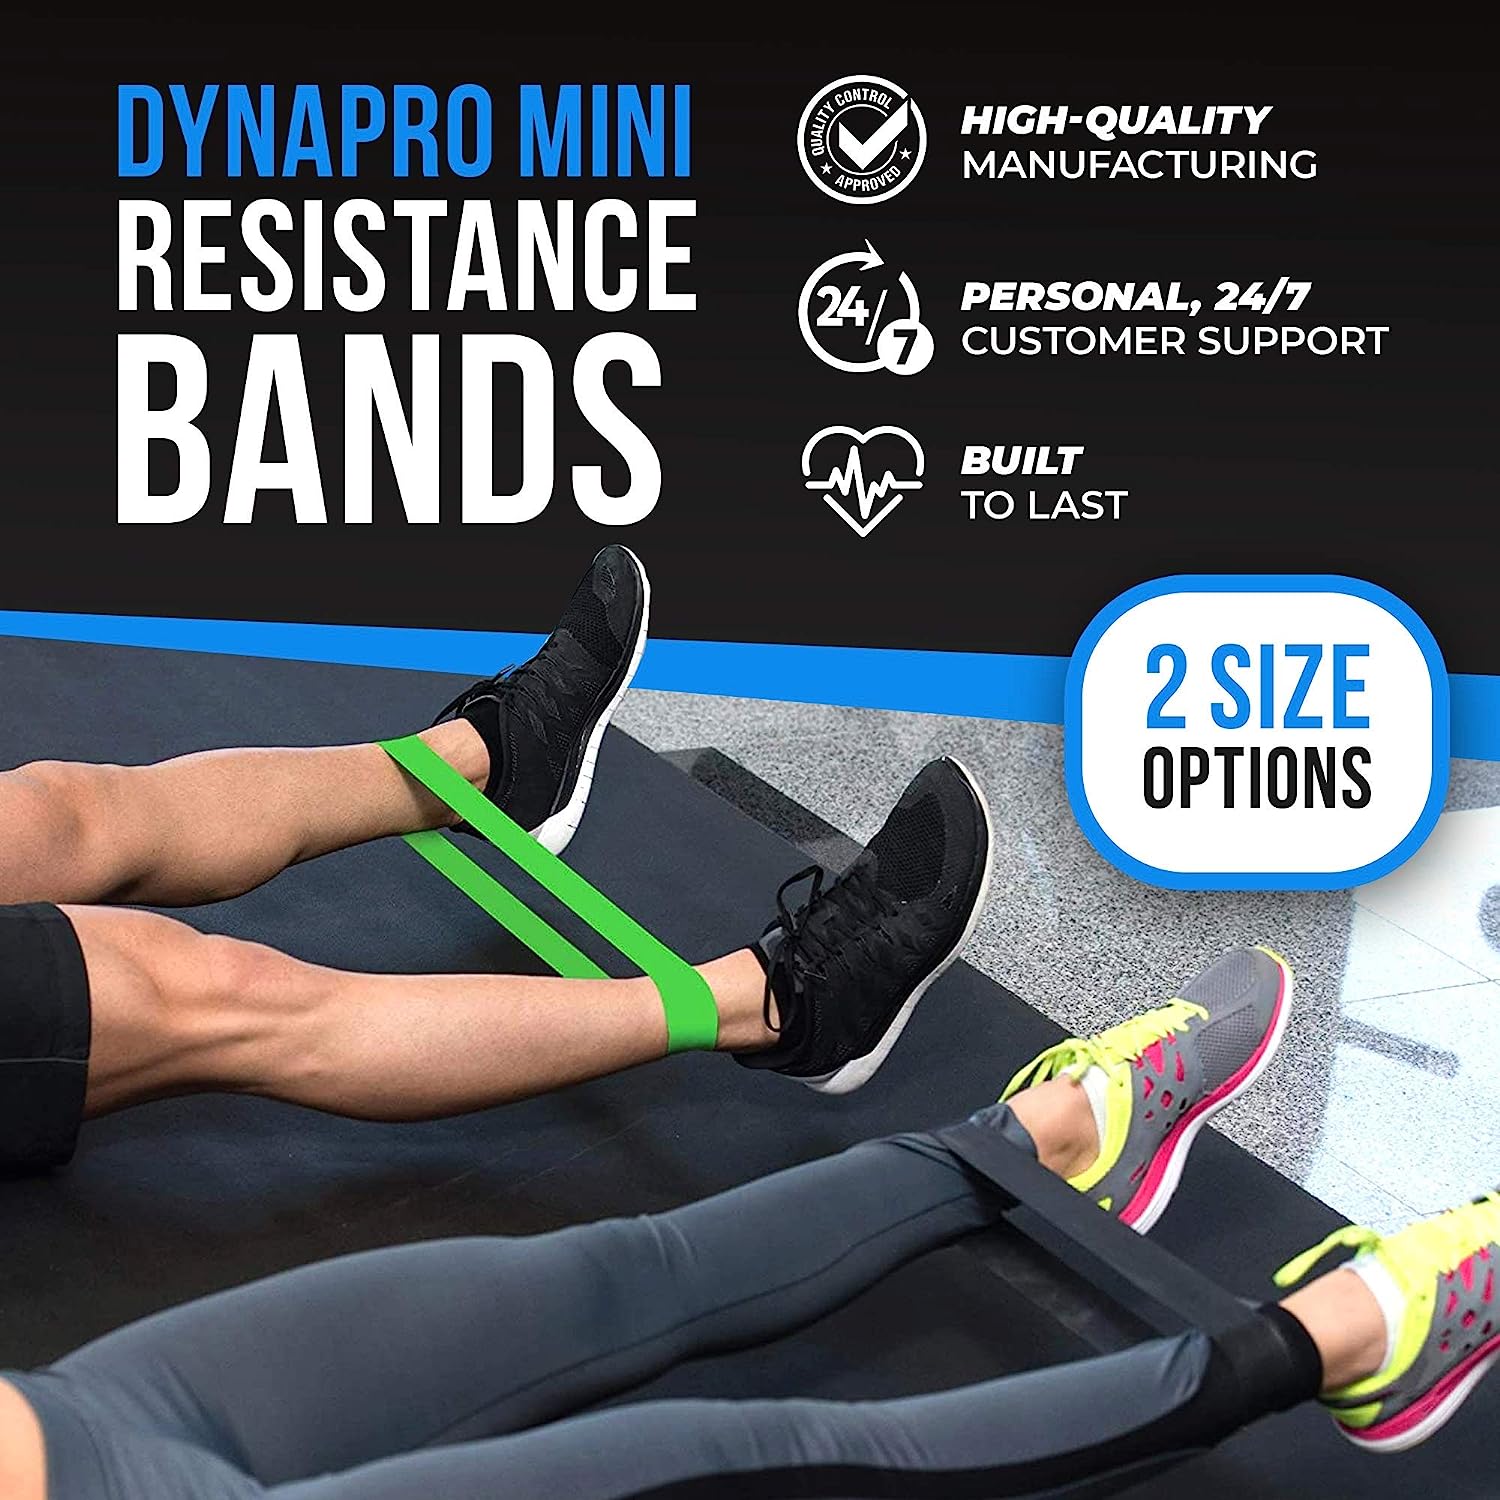 Mini resistance bands made with the highest quality latex on the